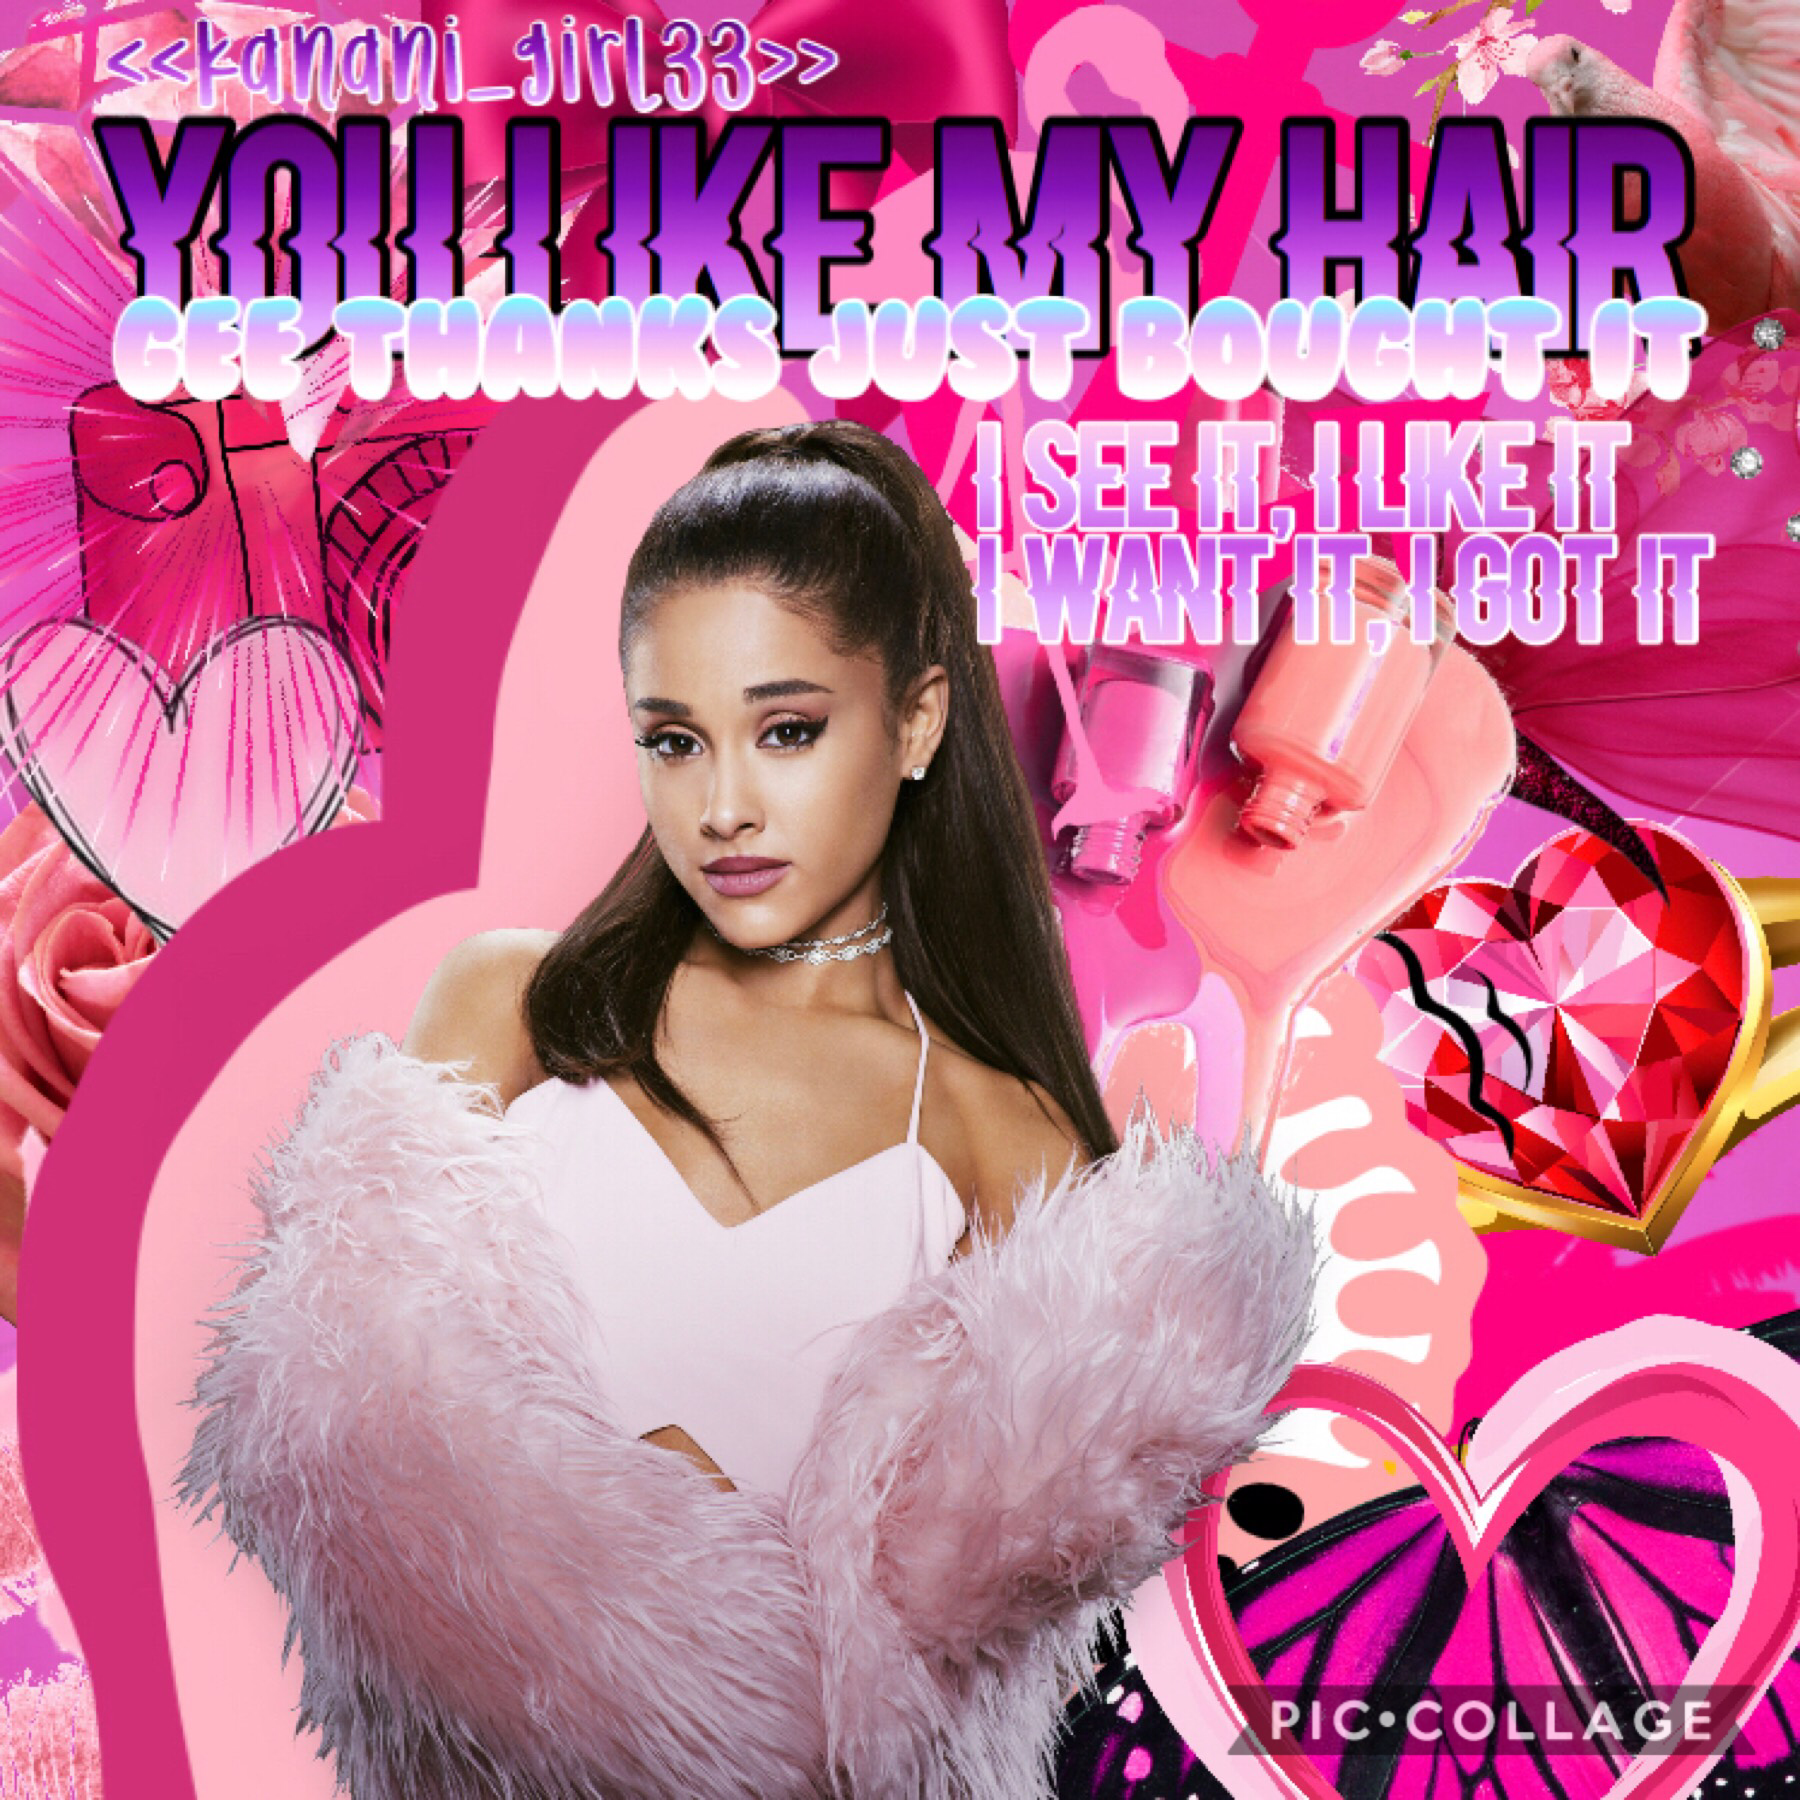 Another collage of this style... wha do you guys think? Qotd: What would you do if you saw Ariana Grande in real life?